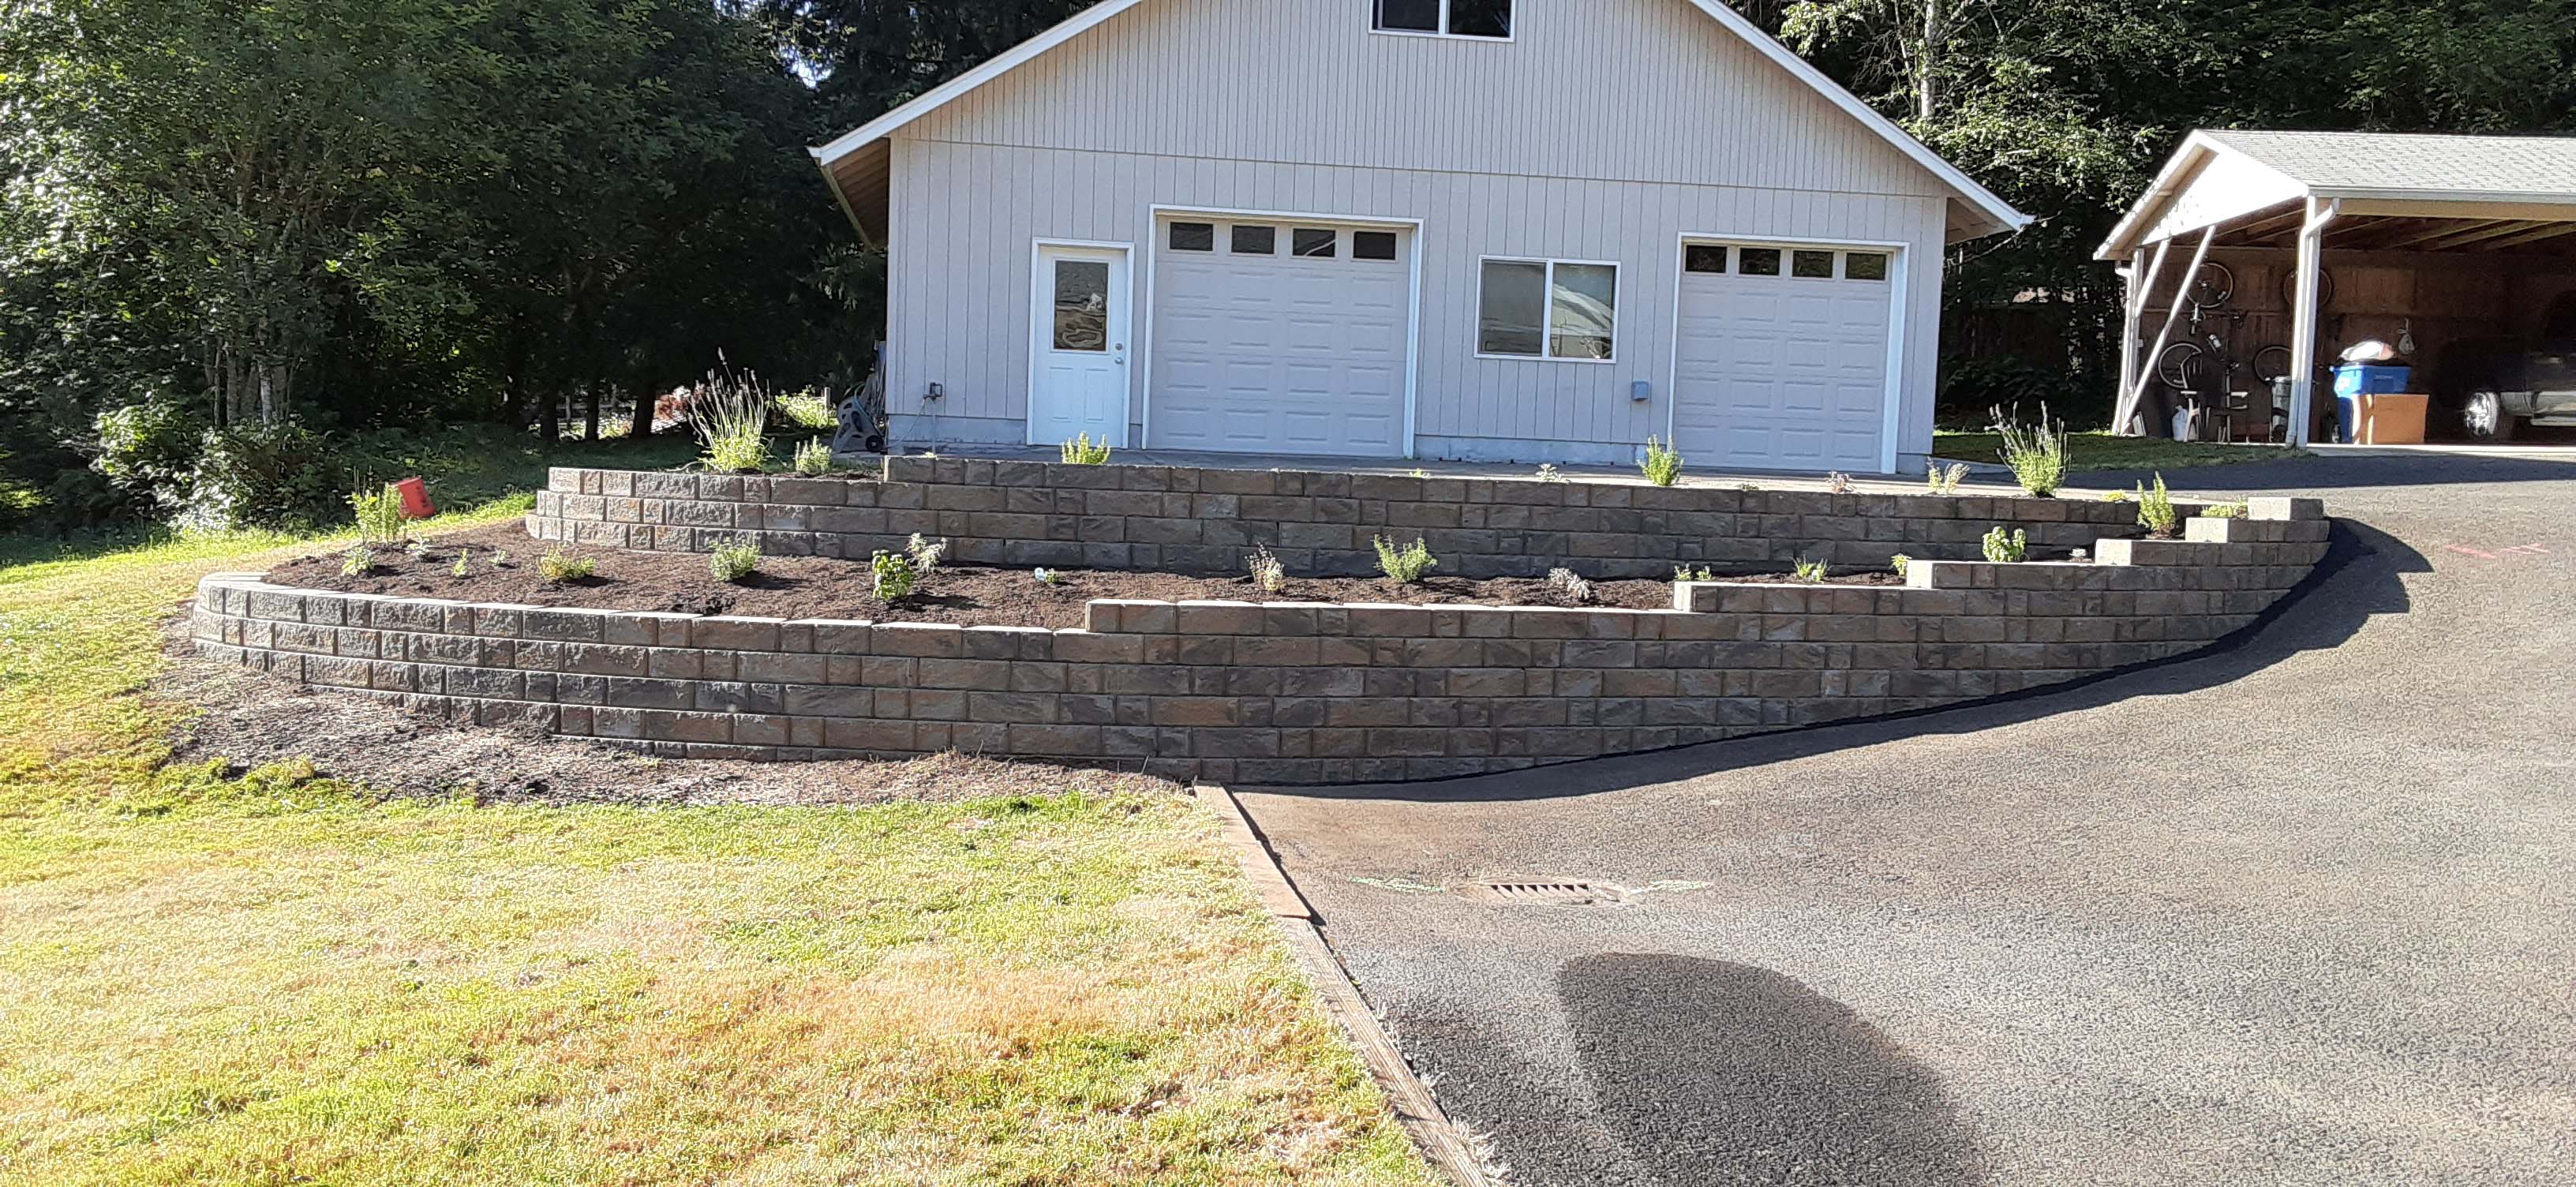 Fully rebuilt, two tiered retaining wall in front of a garage and driveway